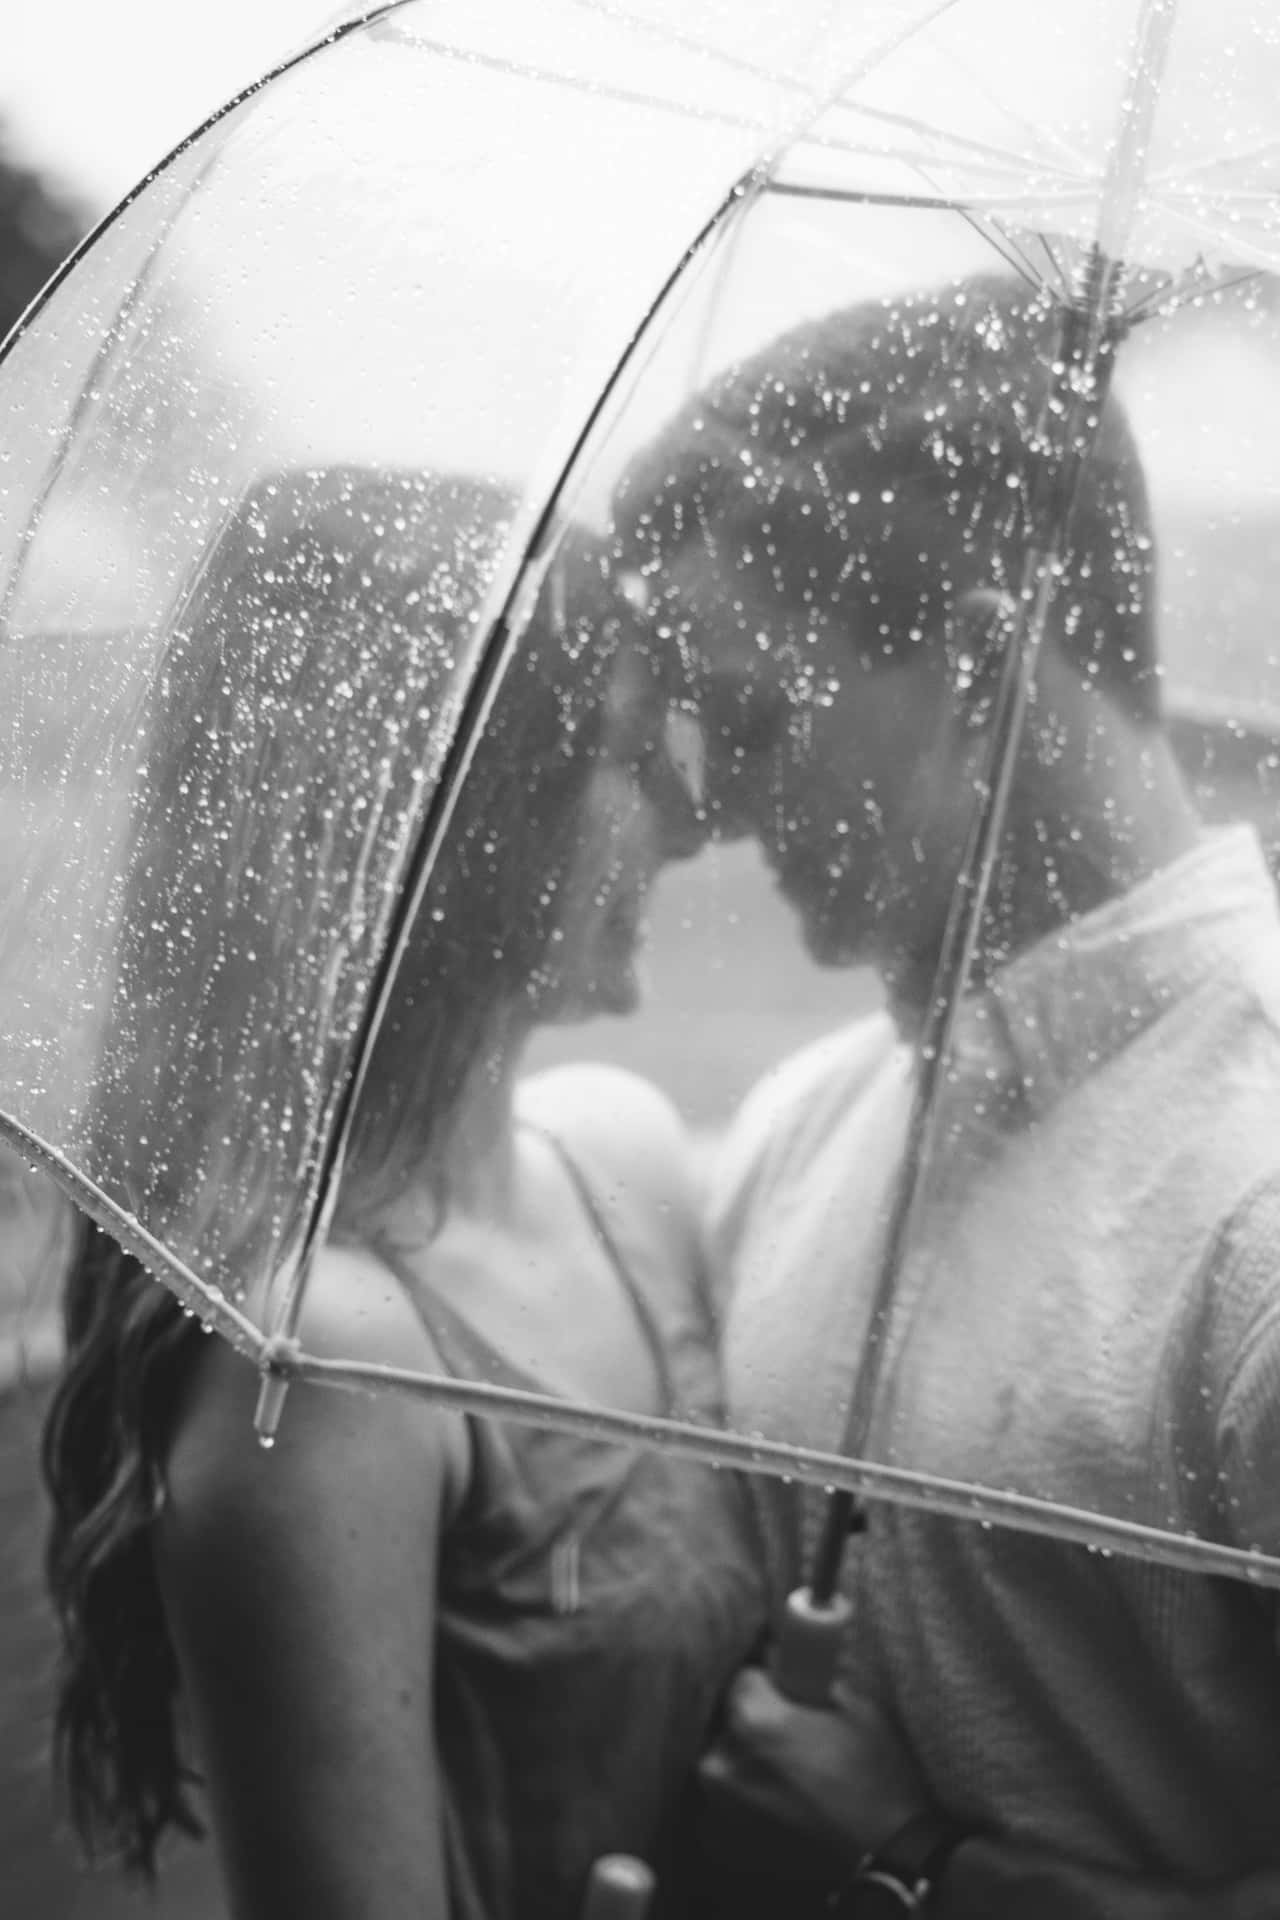 "Two lovers embracing in the rain"